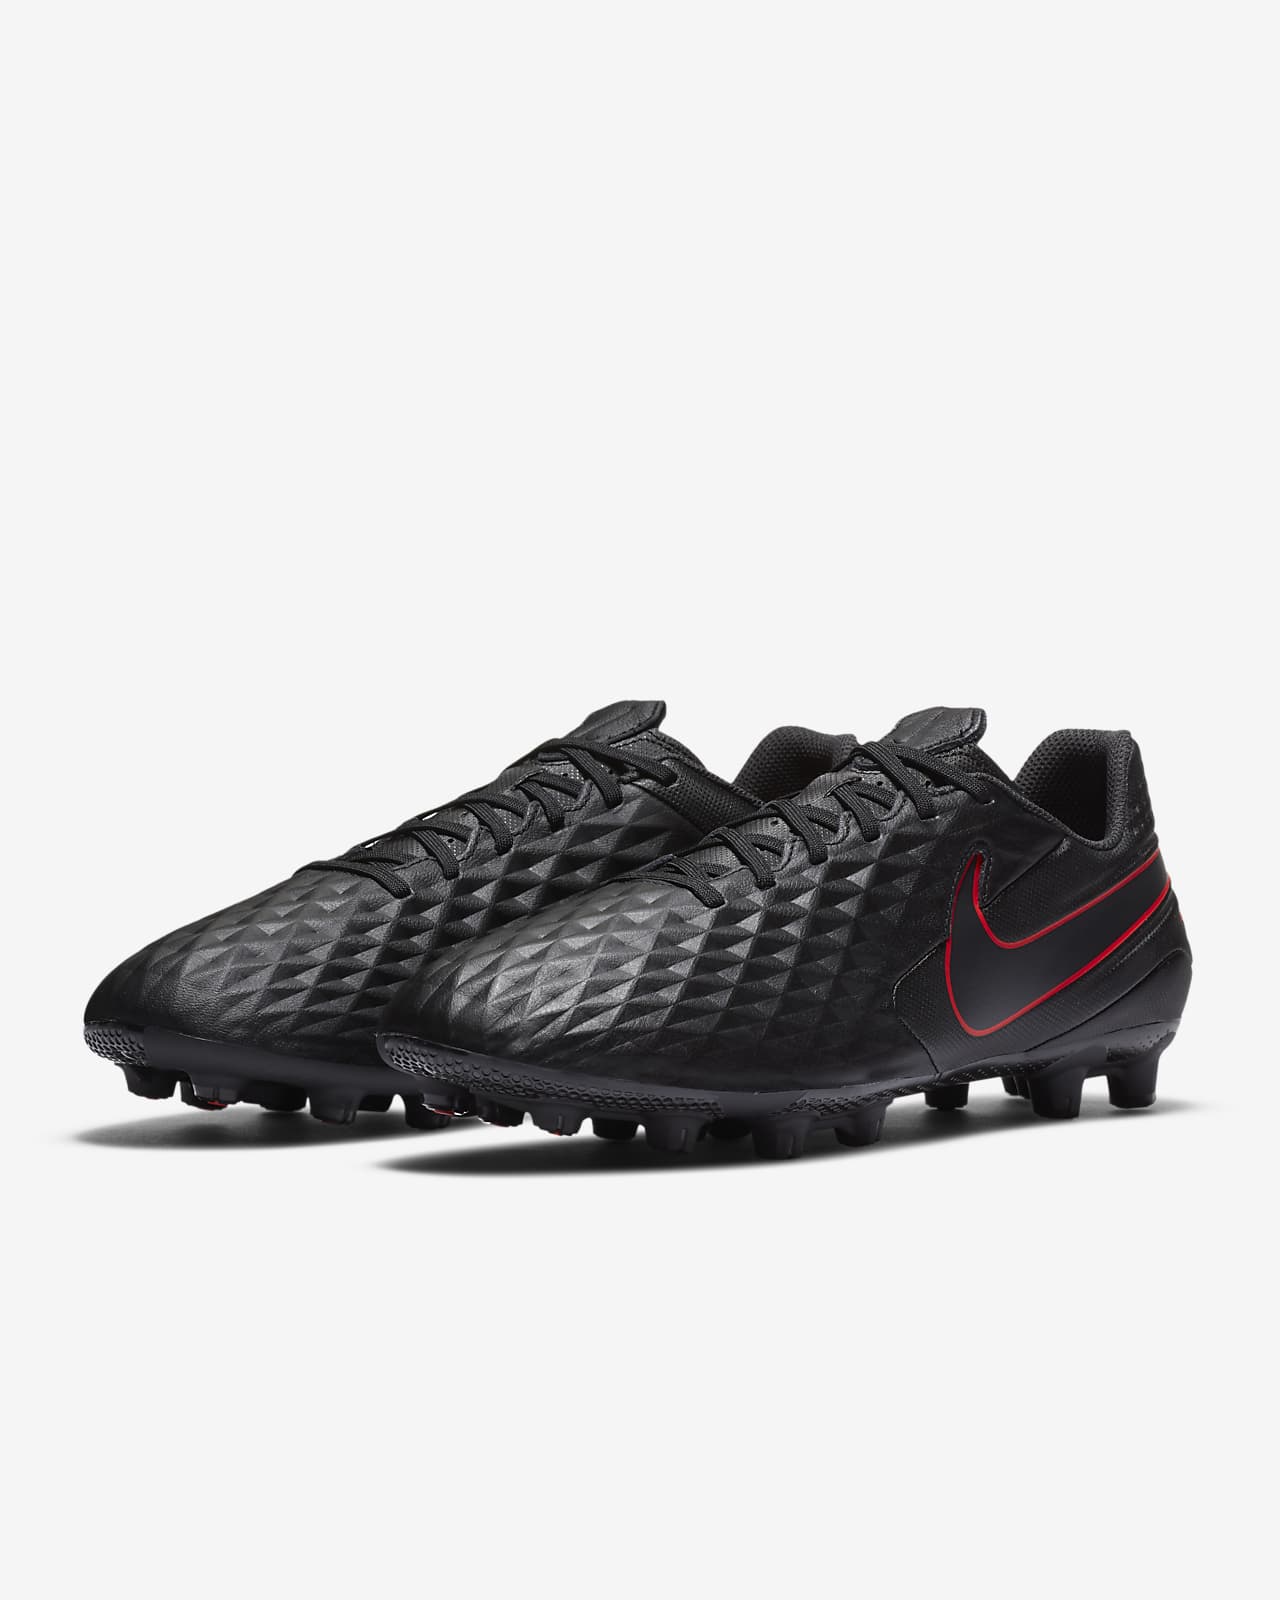 Nike Tiempo Legend 8 Academy Hg Hard Ground Soccer Cleat Nike Jp